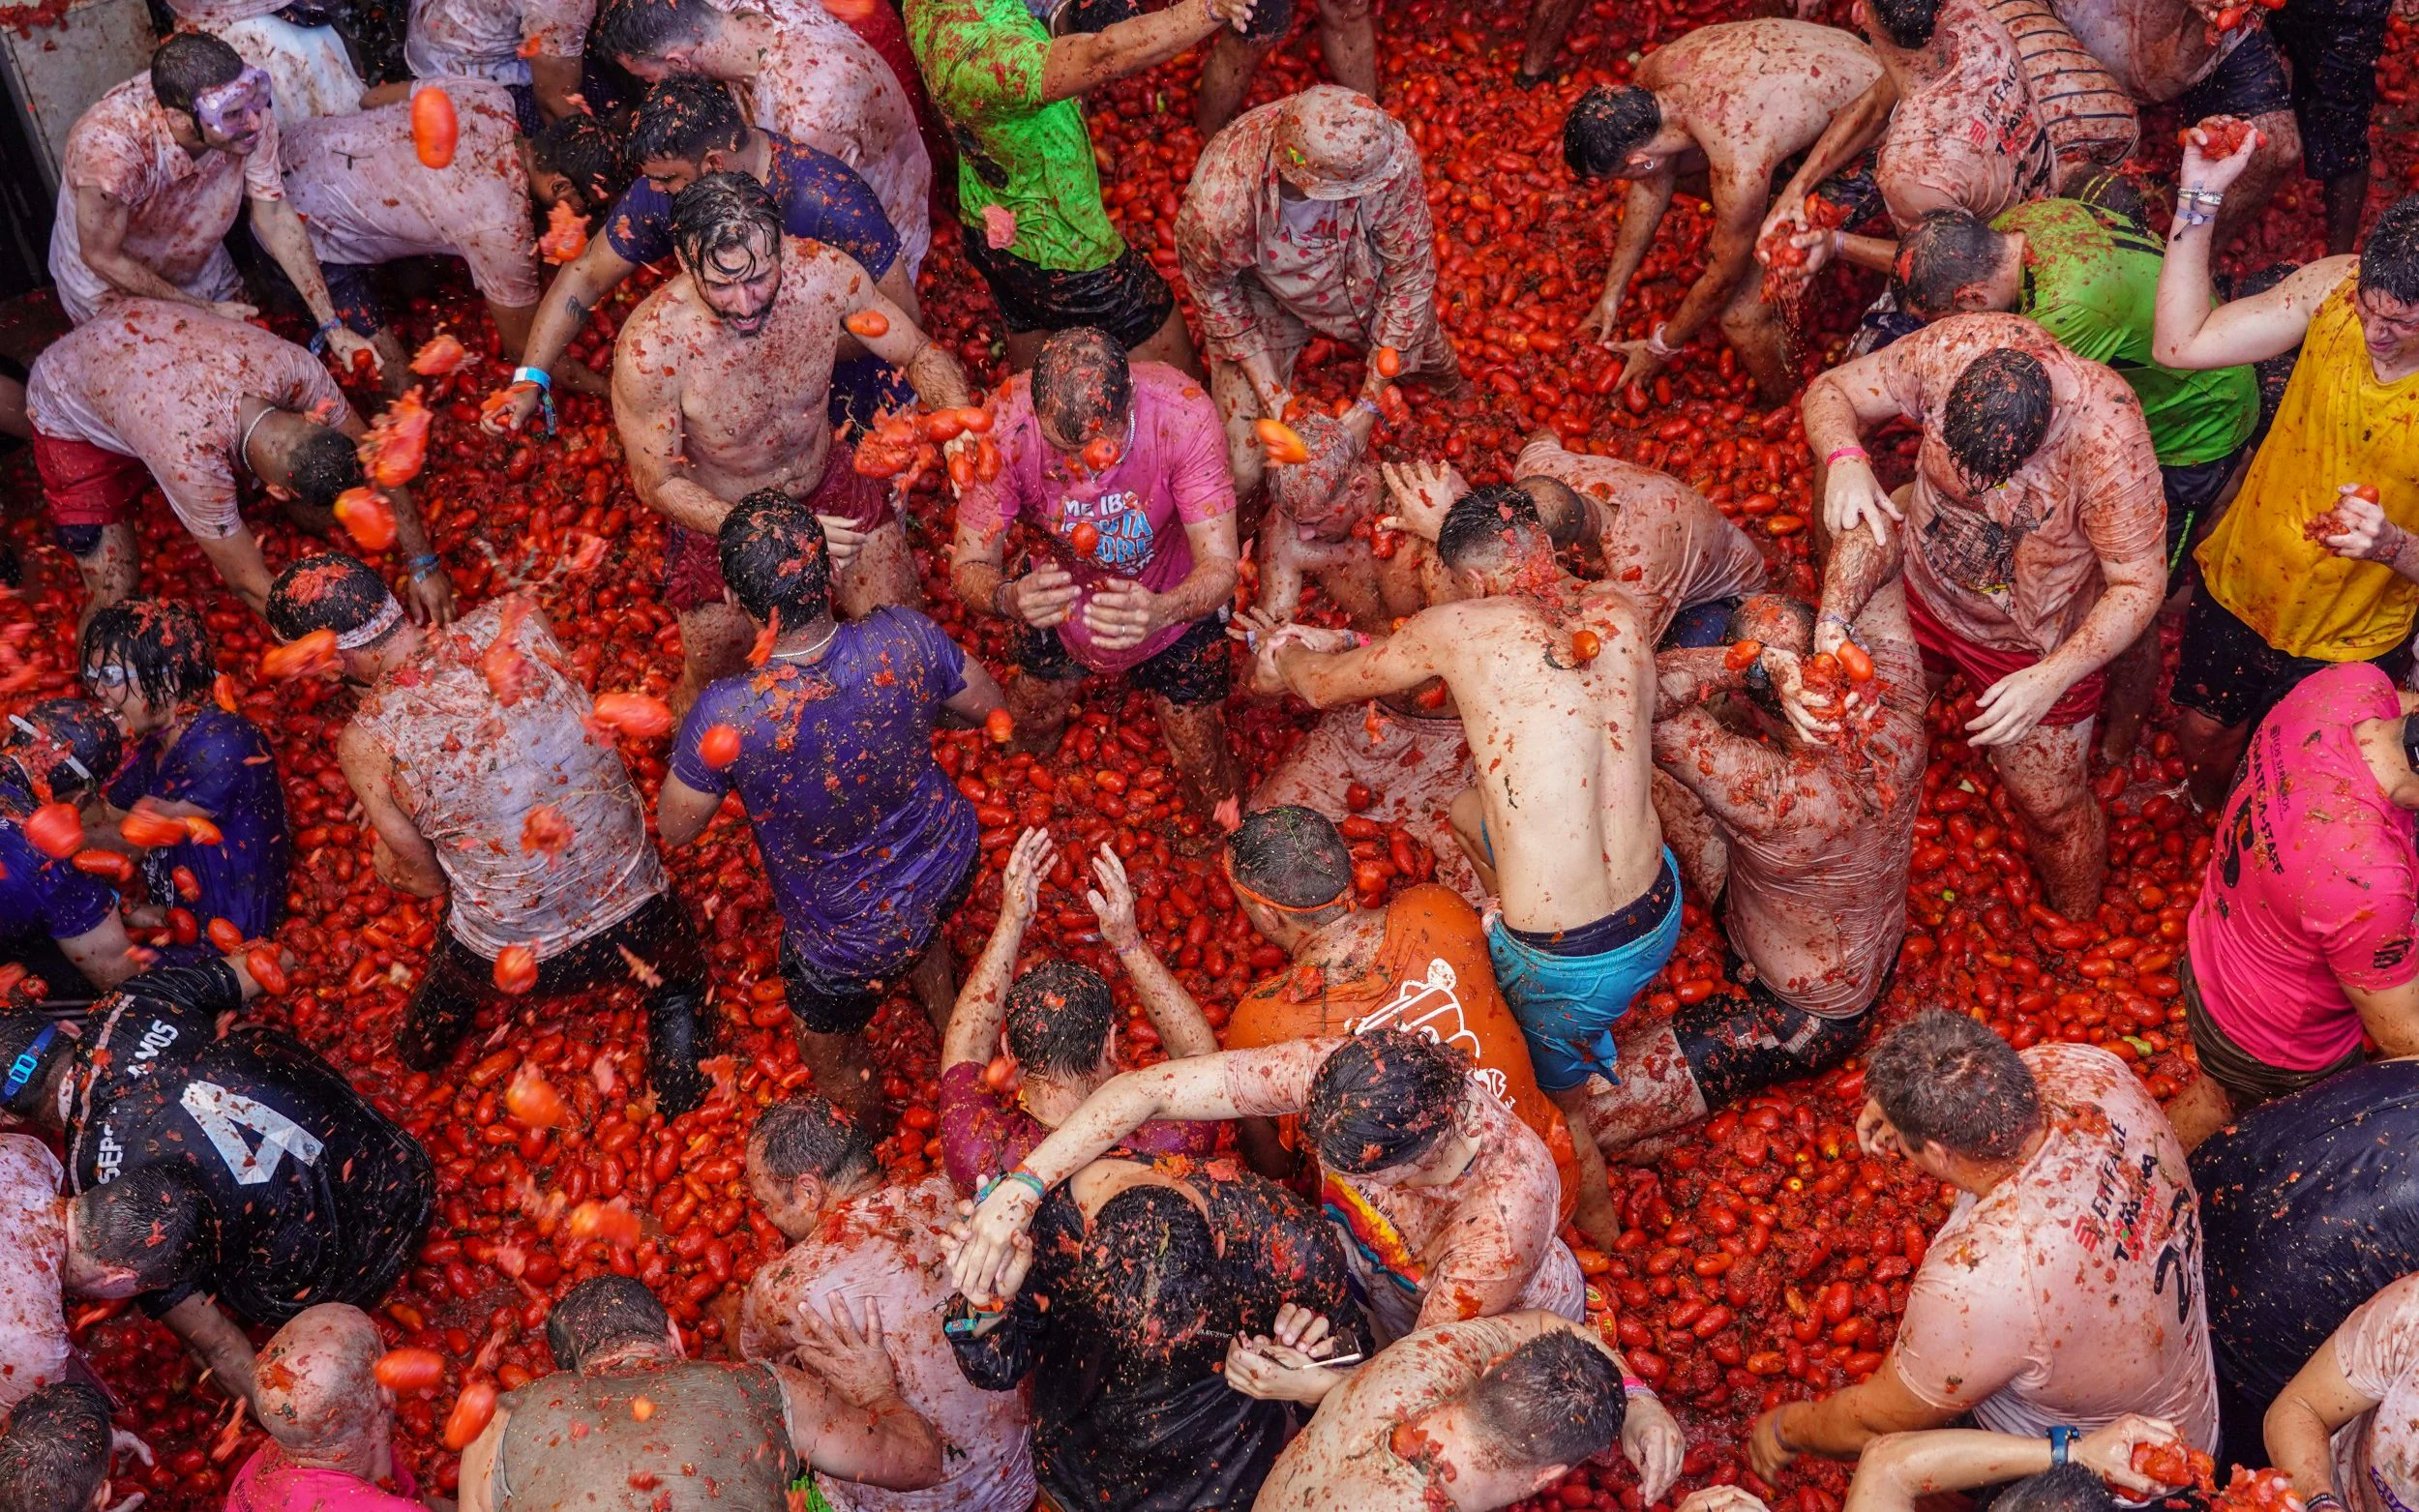 Most Colourful Festivals, Most Colourful Festivals around the world, Colorful Festivals